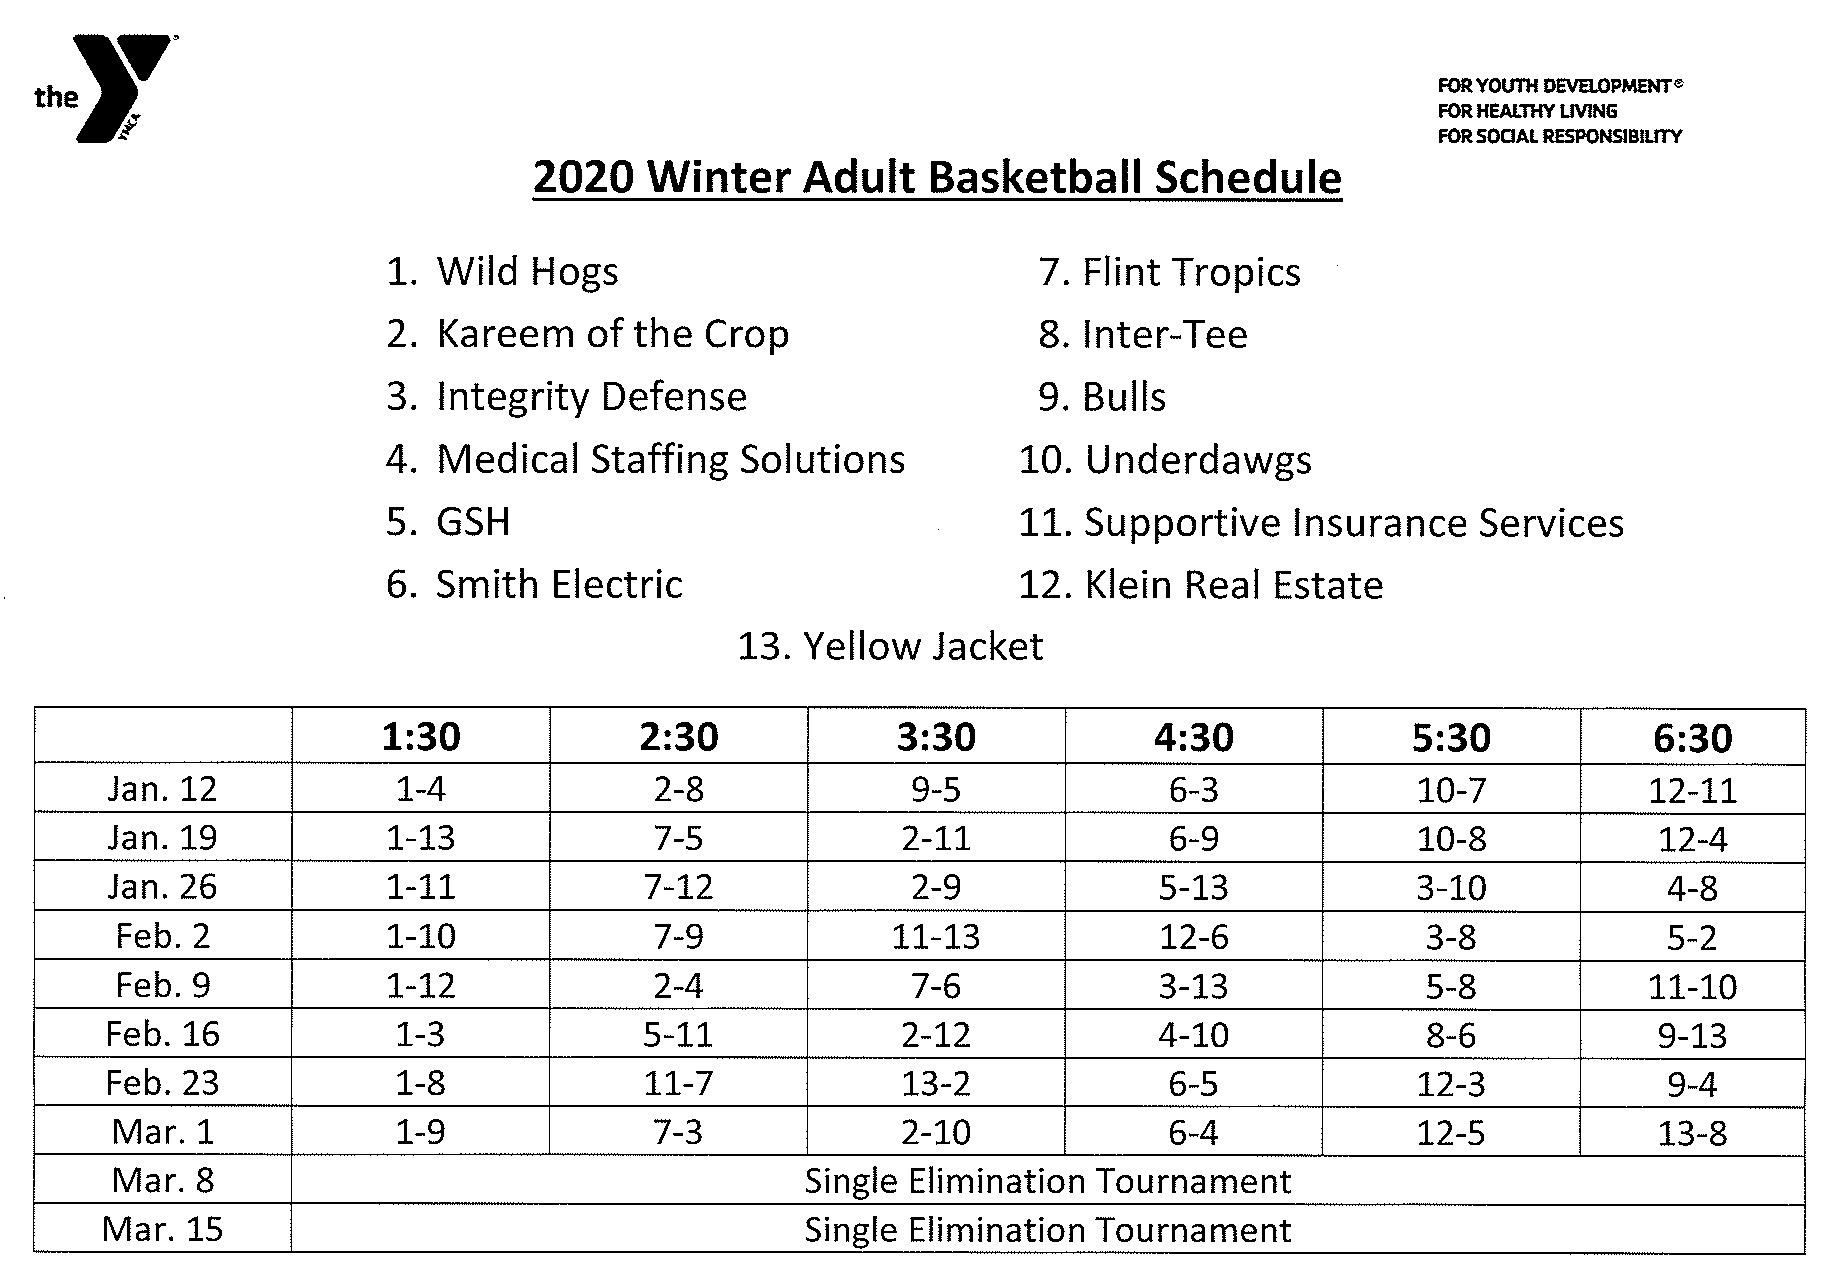 Corrected Adult Basketball Schedule 2020 – The YMCA of Vincennes